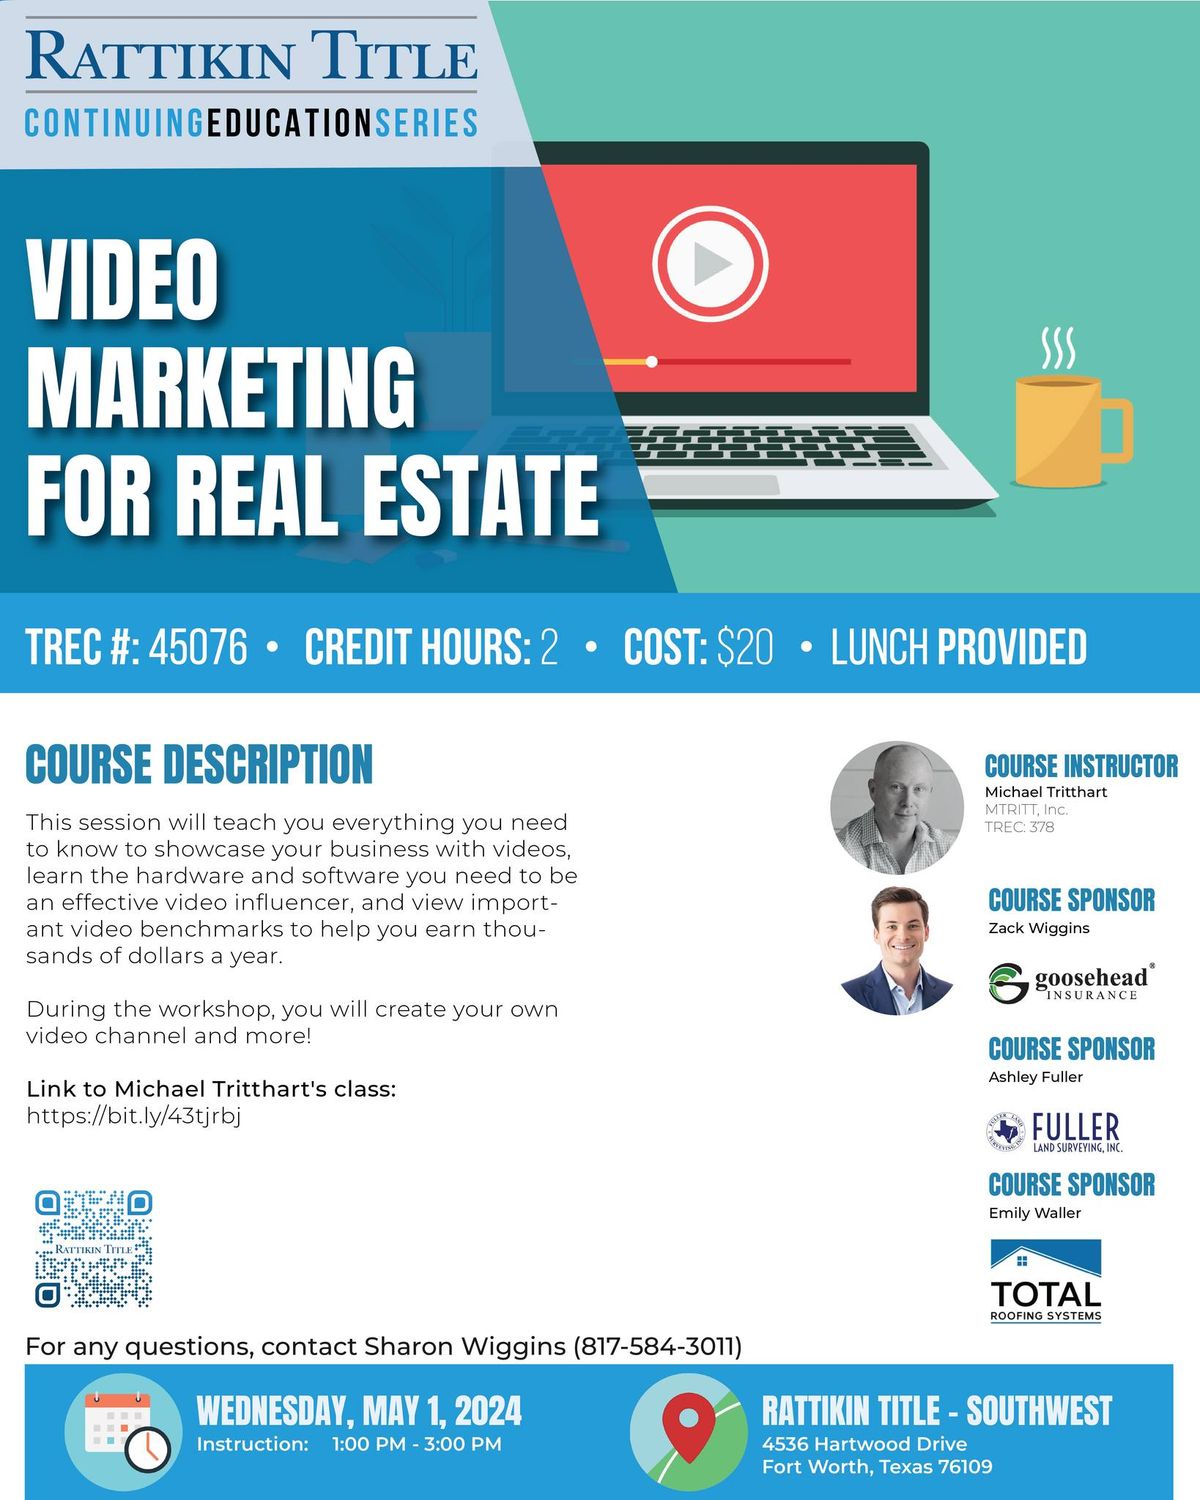 NEW LOCATION! Video Marketing for Real Estate